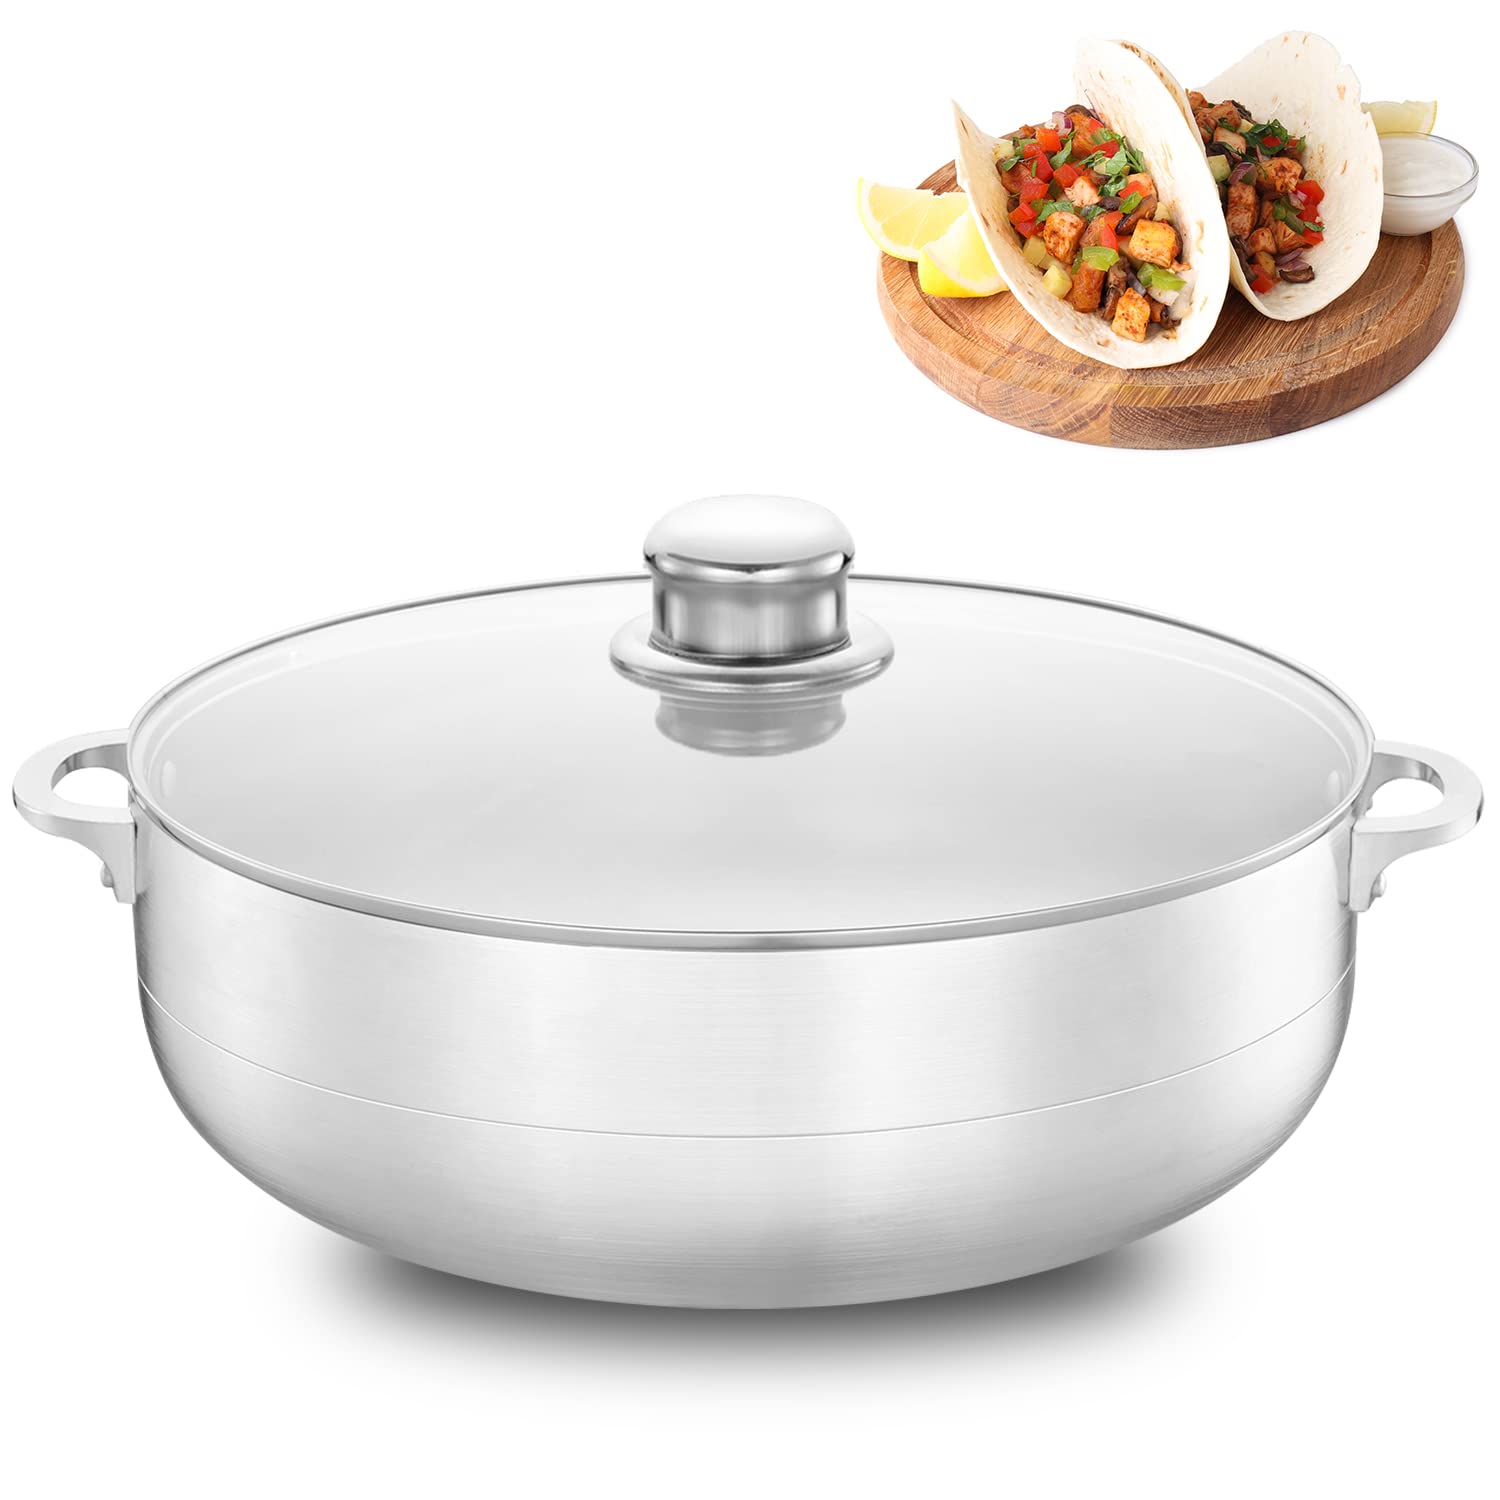 LOCHAS Large Caldero 32 Cups - 11.6 QT / 11 L, Stainless Aluminum Pot, Even  Heat Distribution And Fast Cooking Dutch Oven Pot With Lid, Ergonomic  Handles, Ideal For Rice, French Fries, And More